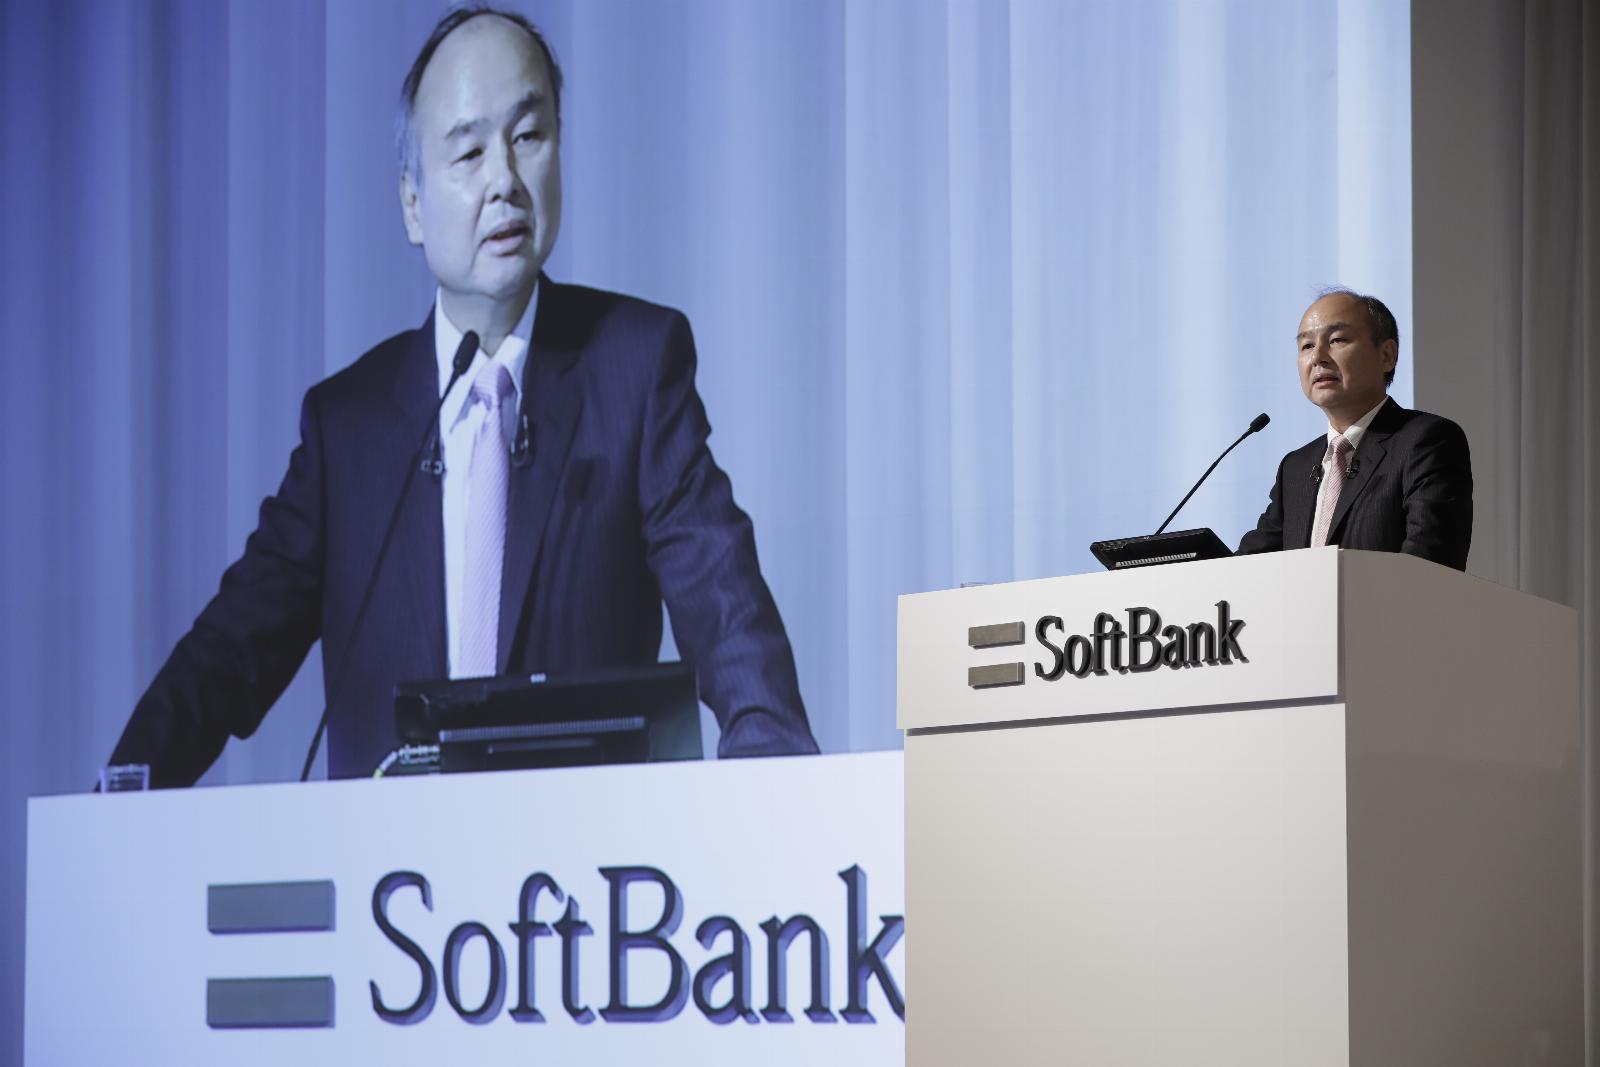 SoftBank’s Masayoshi Son is reportedly seeking $100B to build a new AI chip venture 